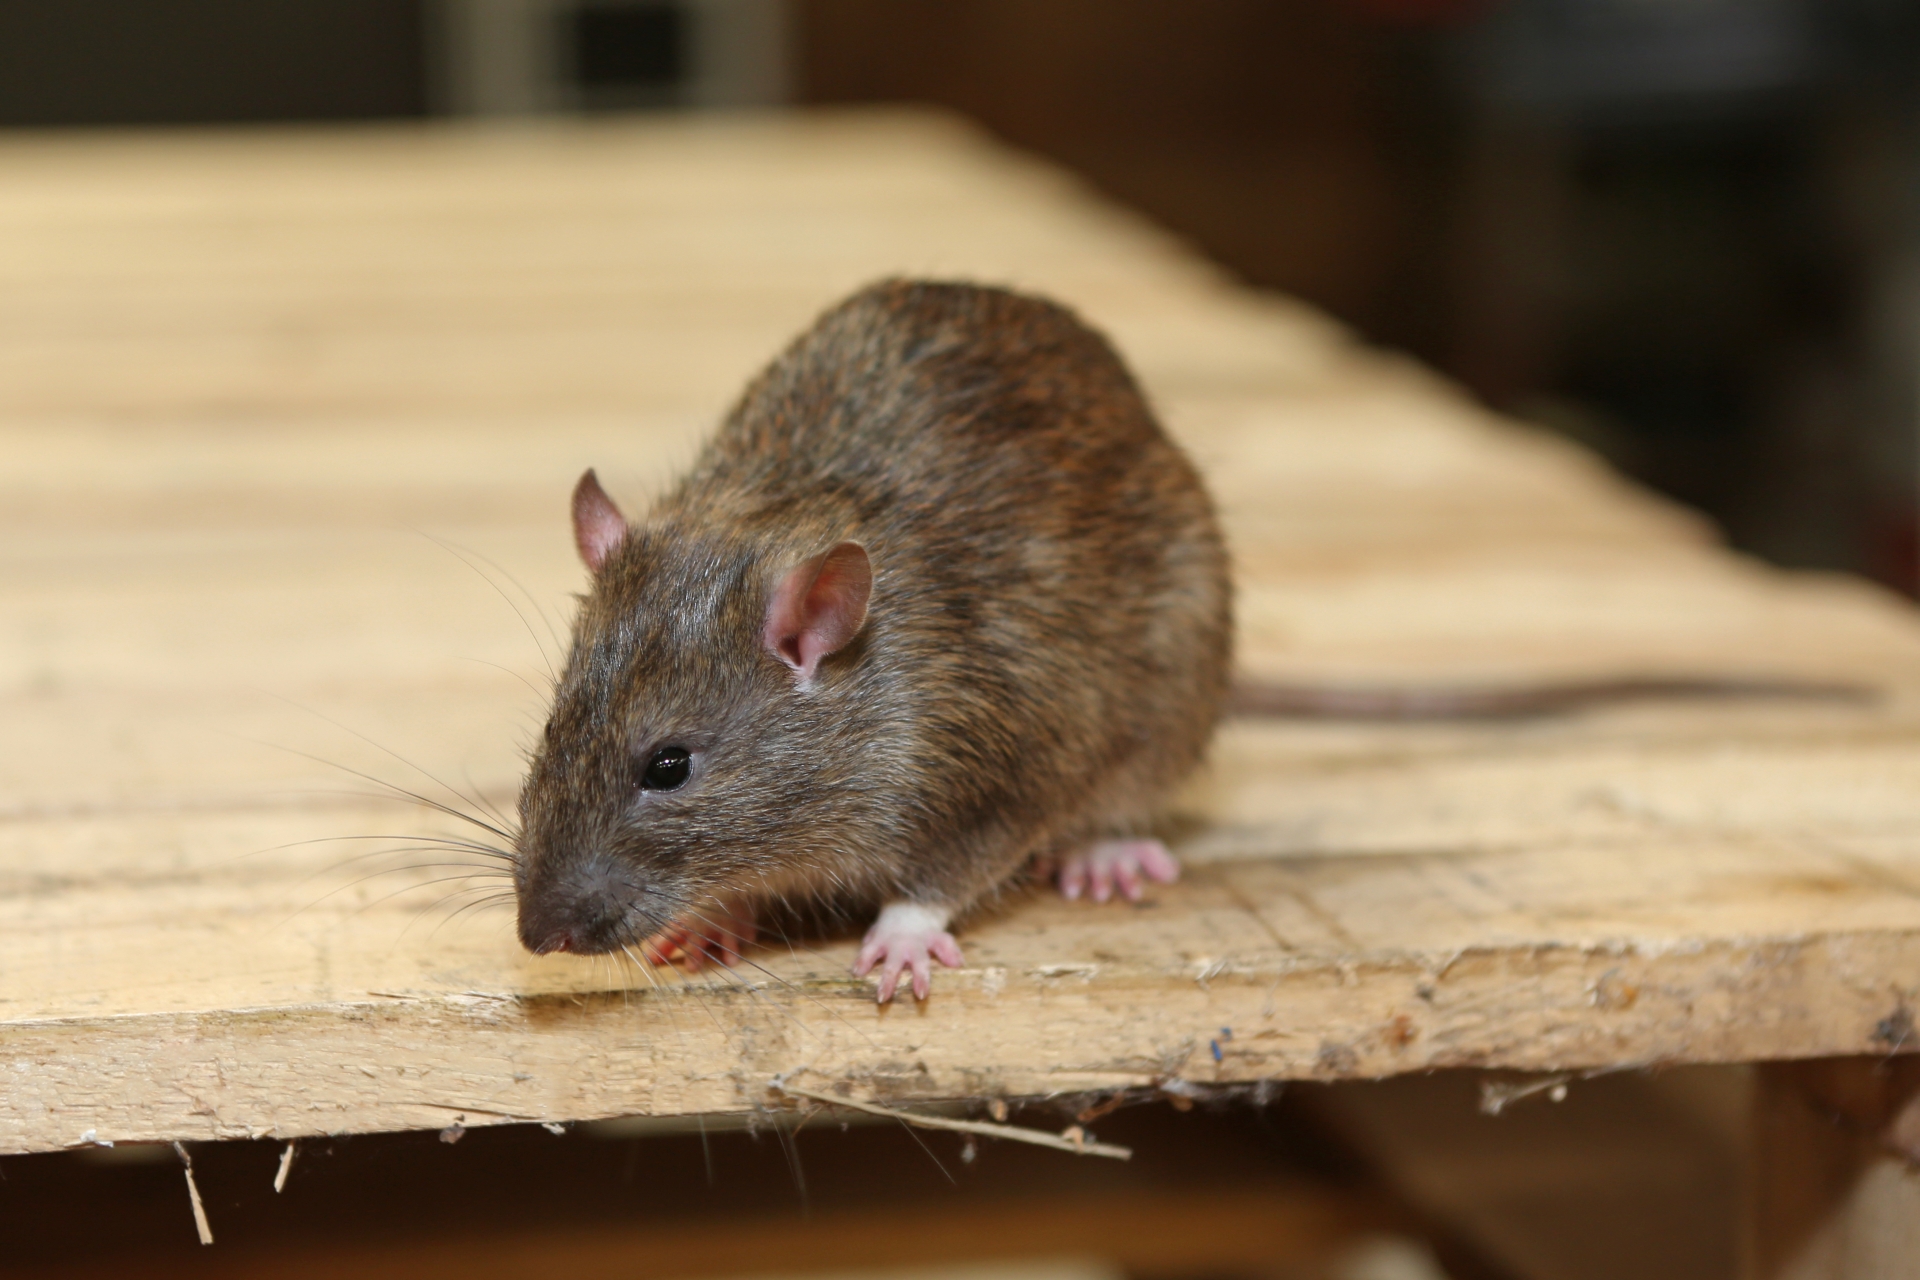 Rat Control, Pest Control in East Finchley, N2. Call Now 020 8166 9746